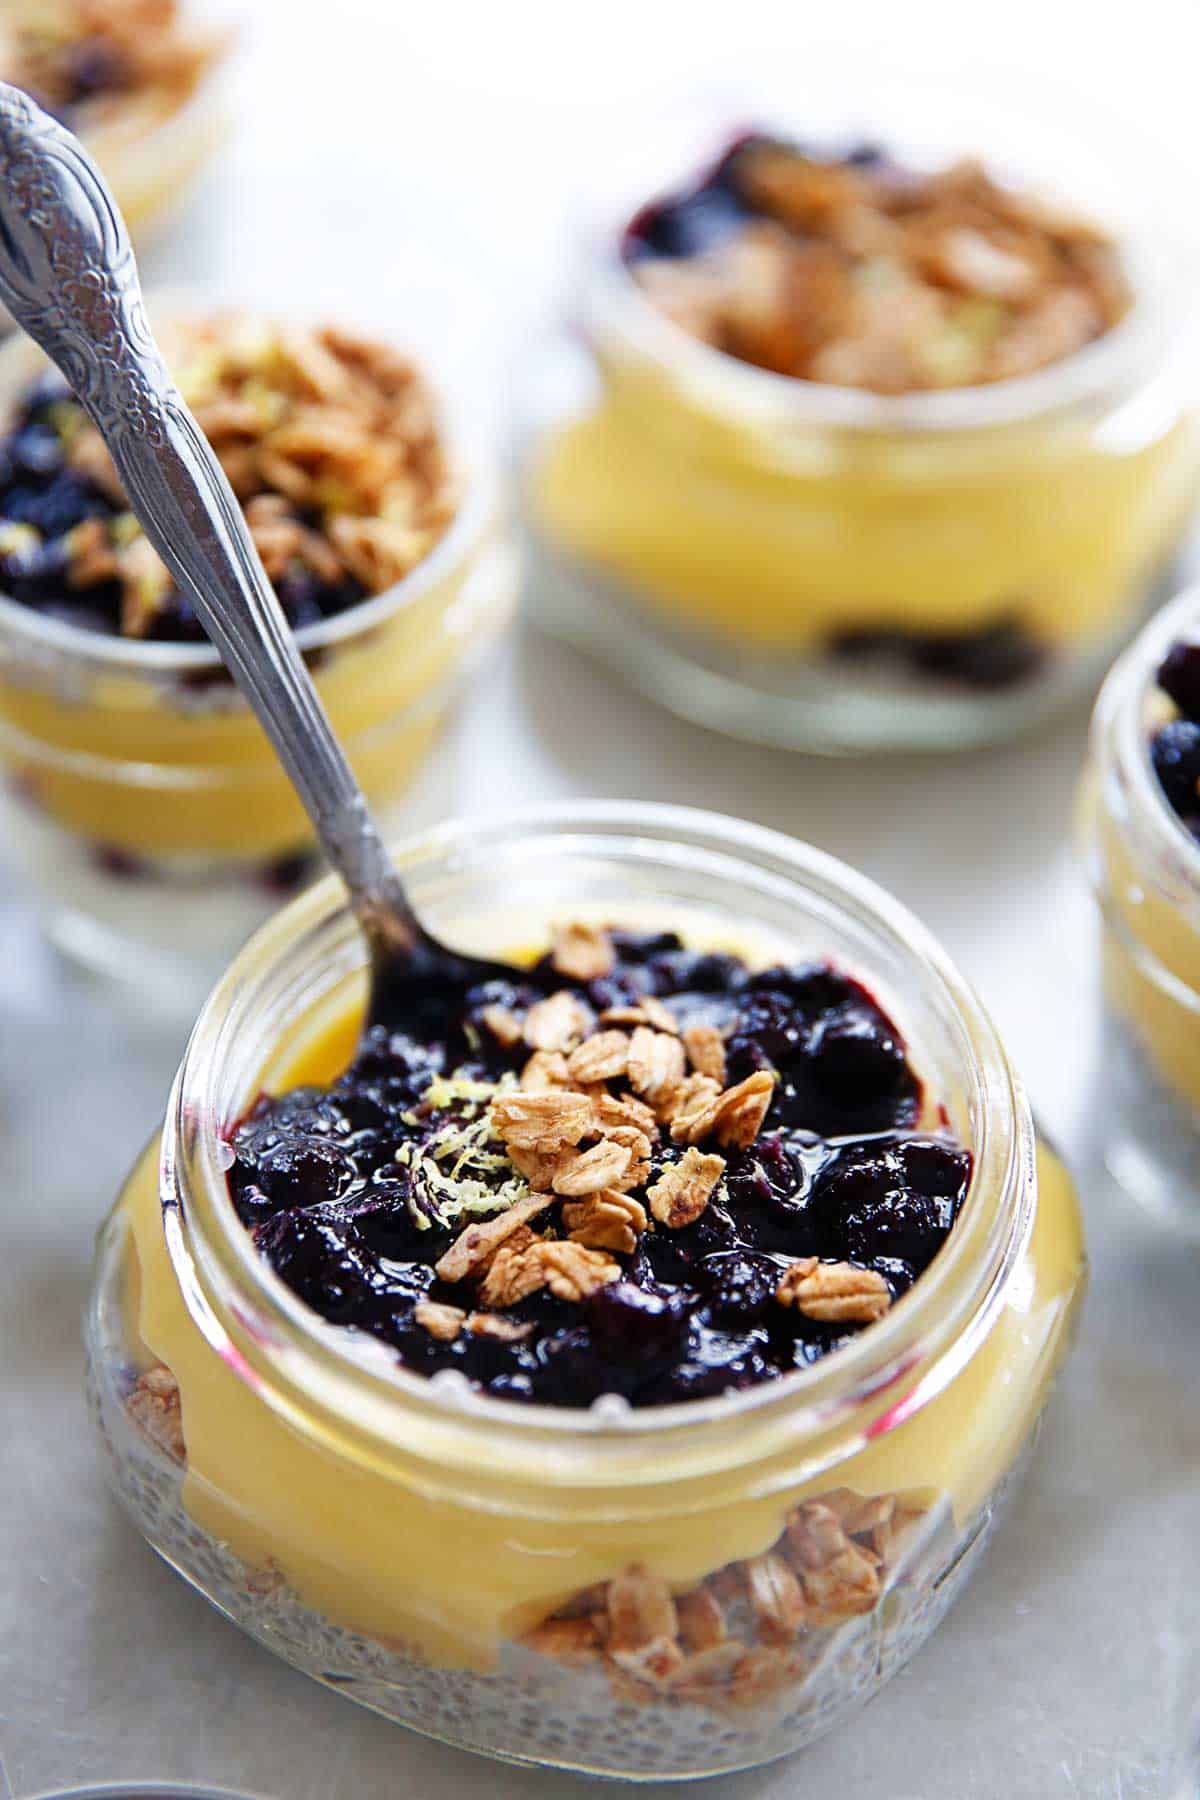 Lemon and blueberry breakfast parfaits in a jar with a spoon in it.